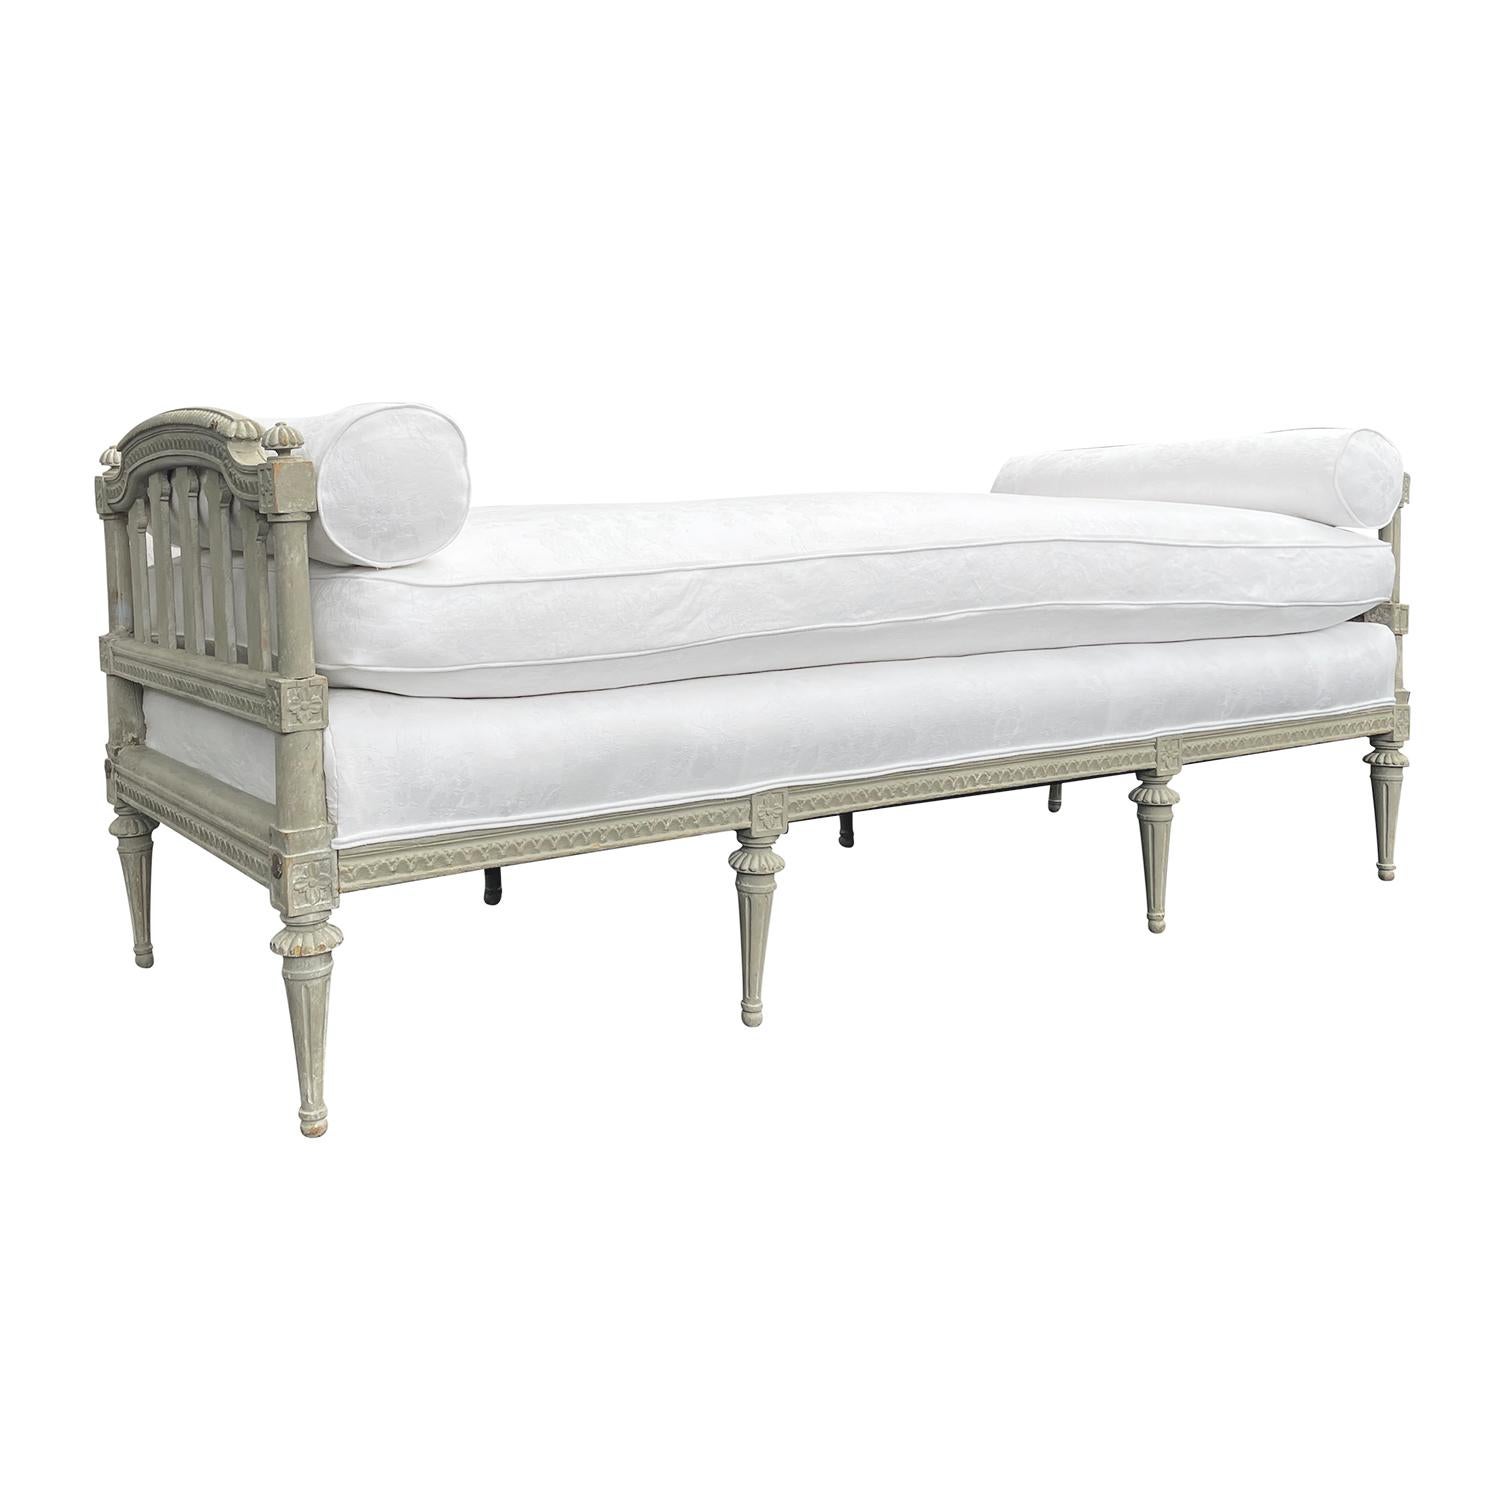 18th-19th Century White Swedish Gustavian Pinewood Daybed, Antique Sofa Bench In Good Condition For Sale In West Palm Beach, FL